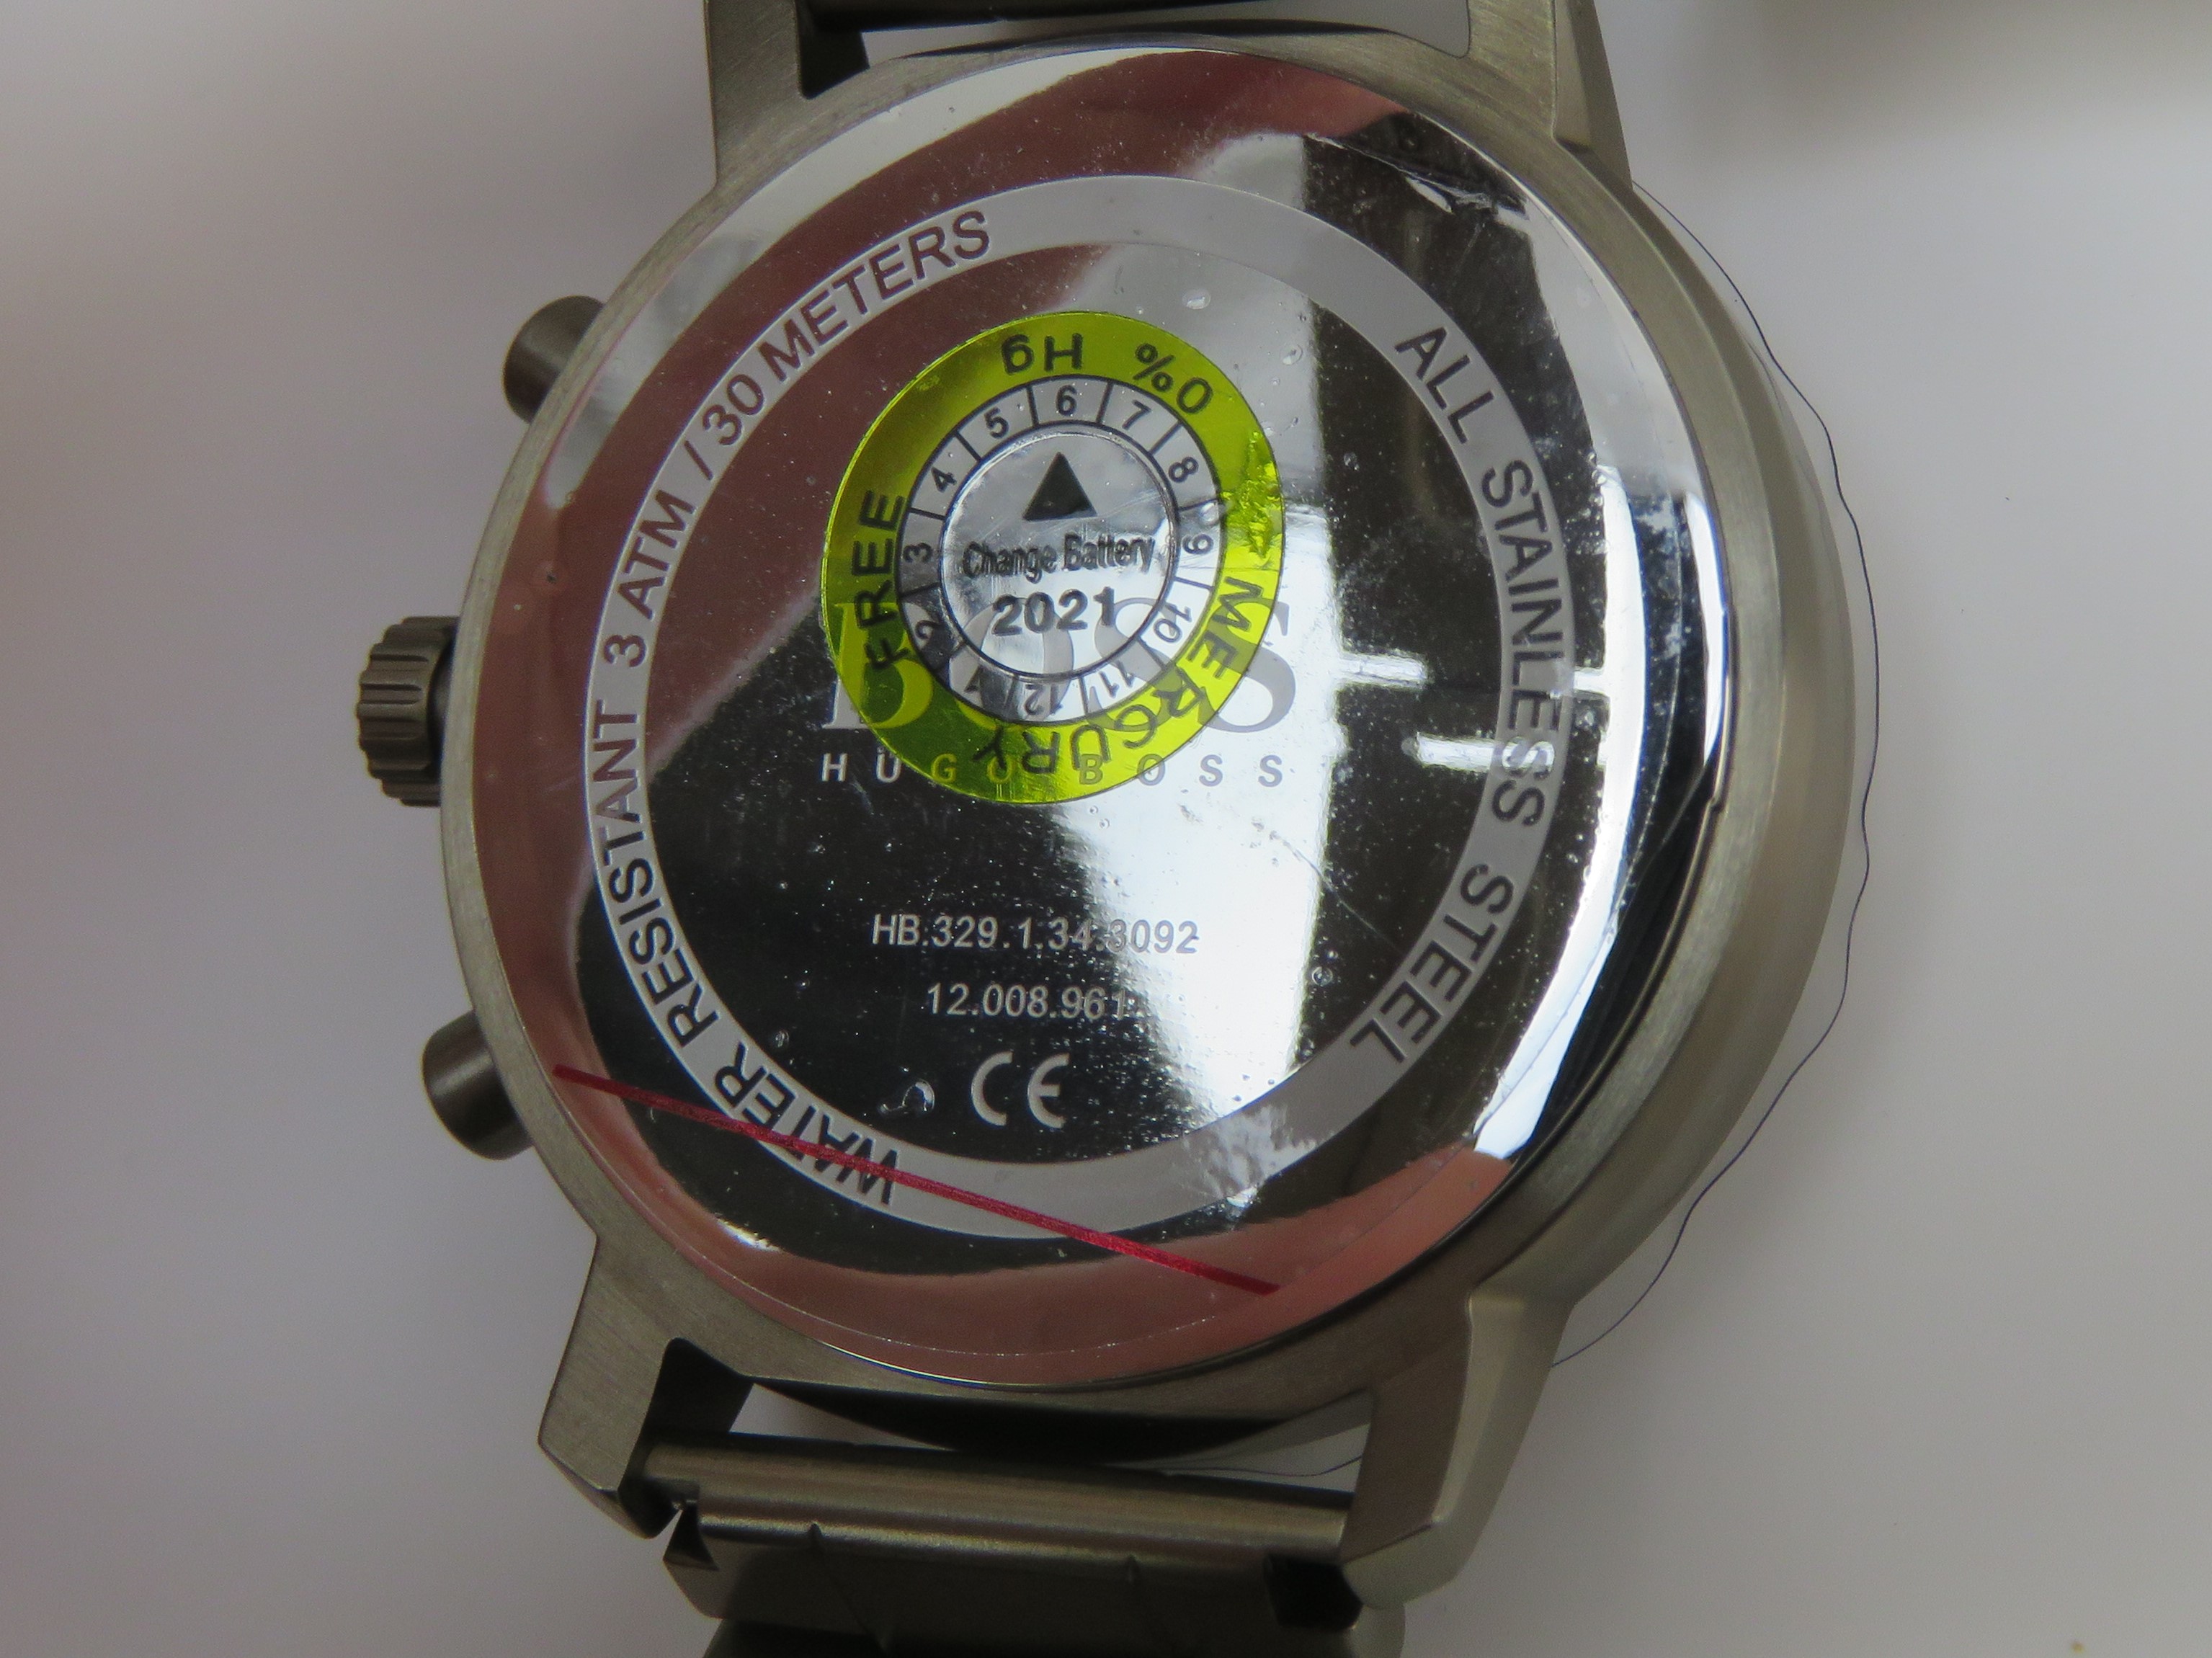 A Hugo Boss stainless steel wristwatch in as new unworn condition complete with box and papers, - Image 7 of 9